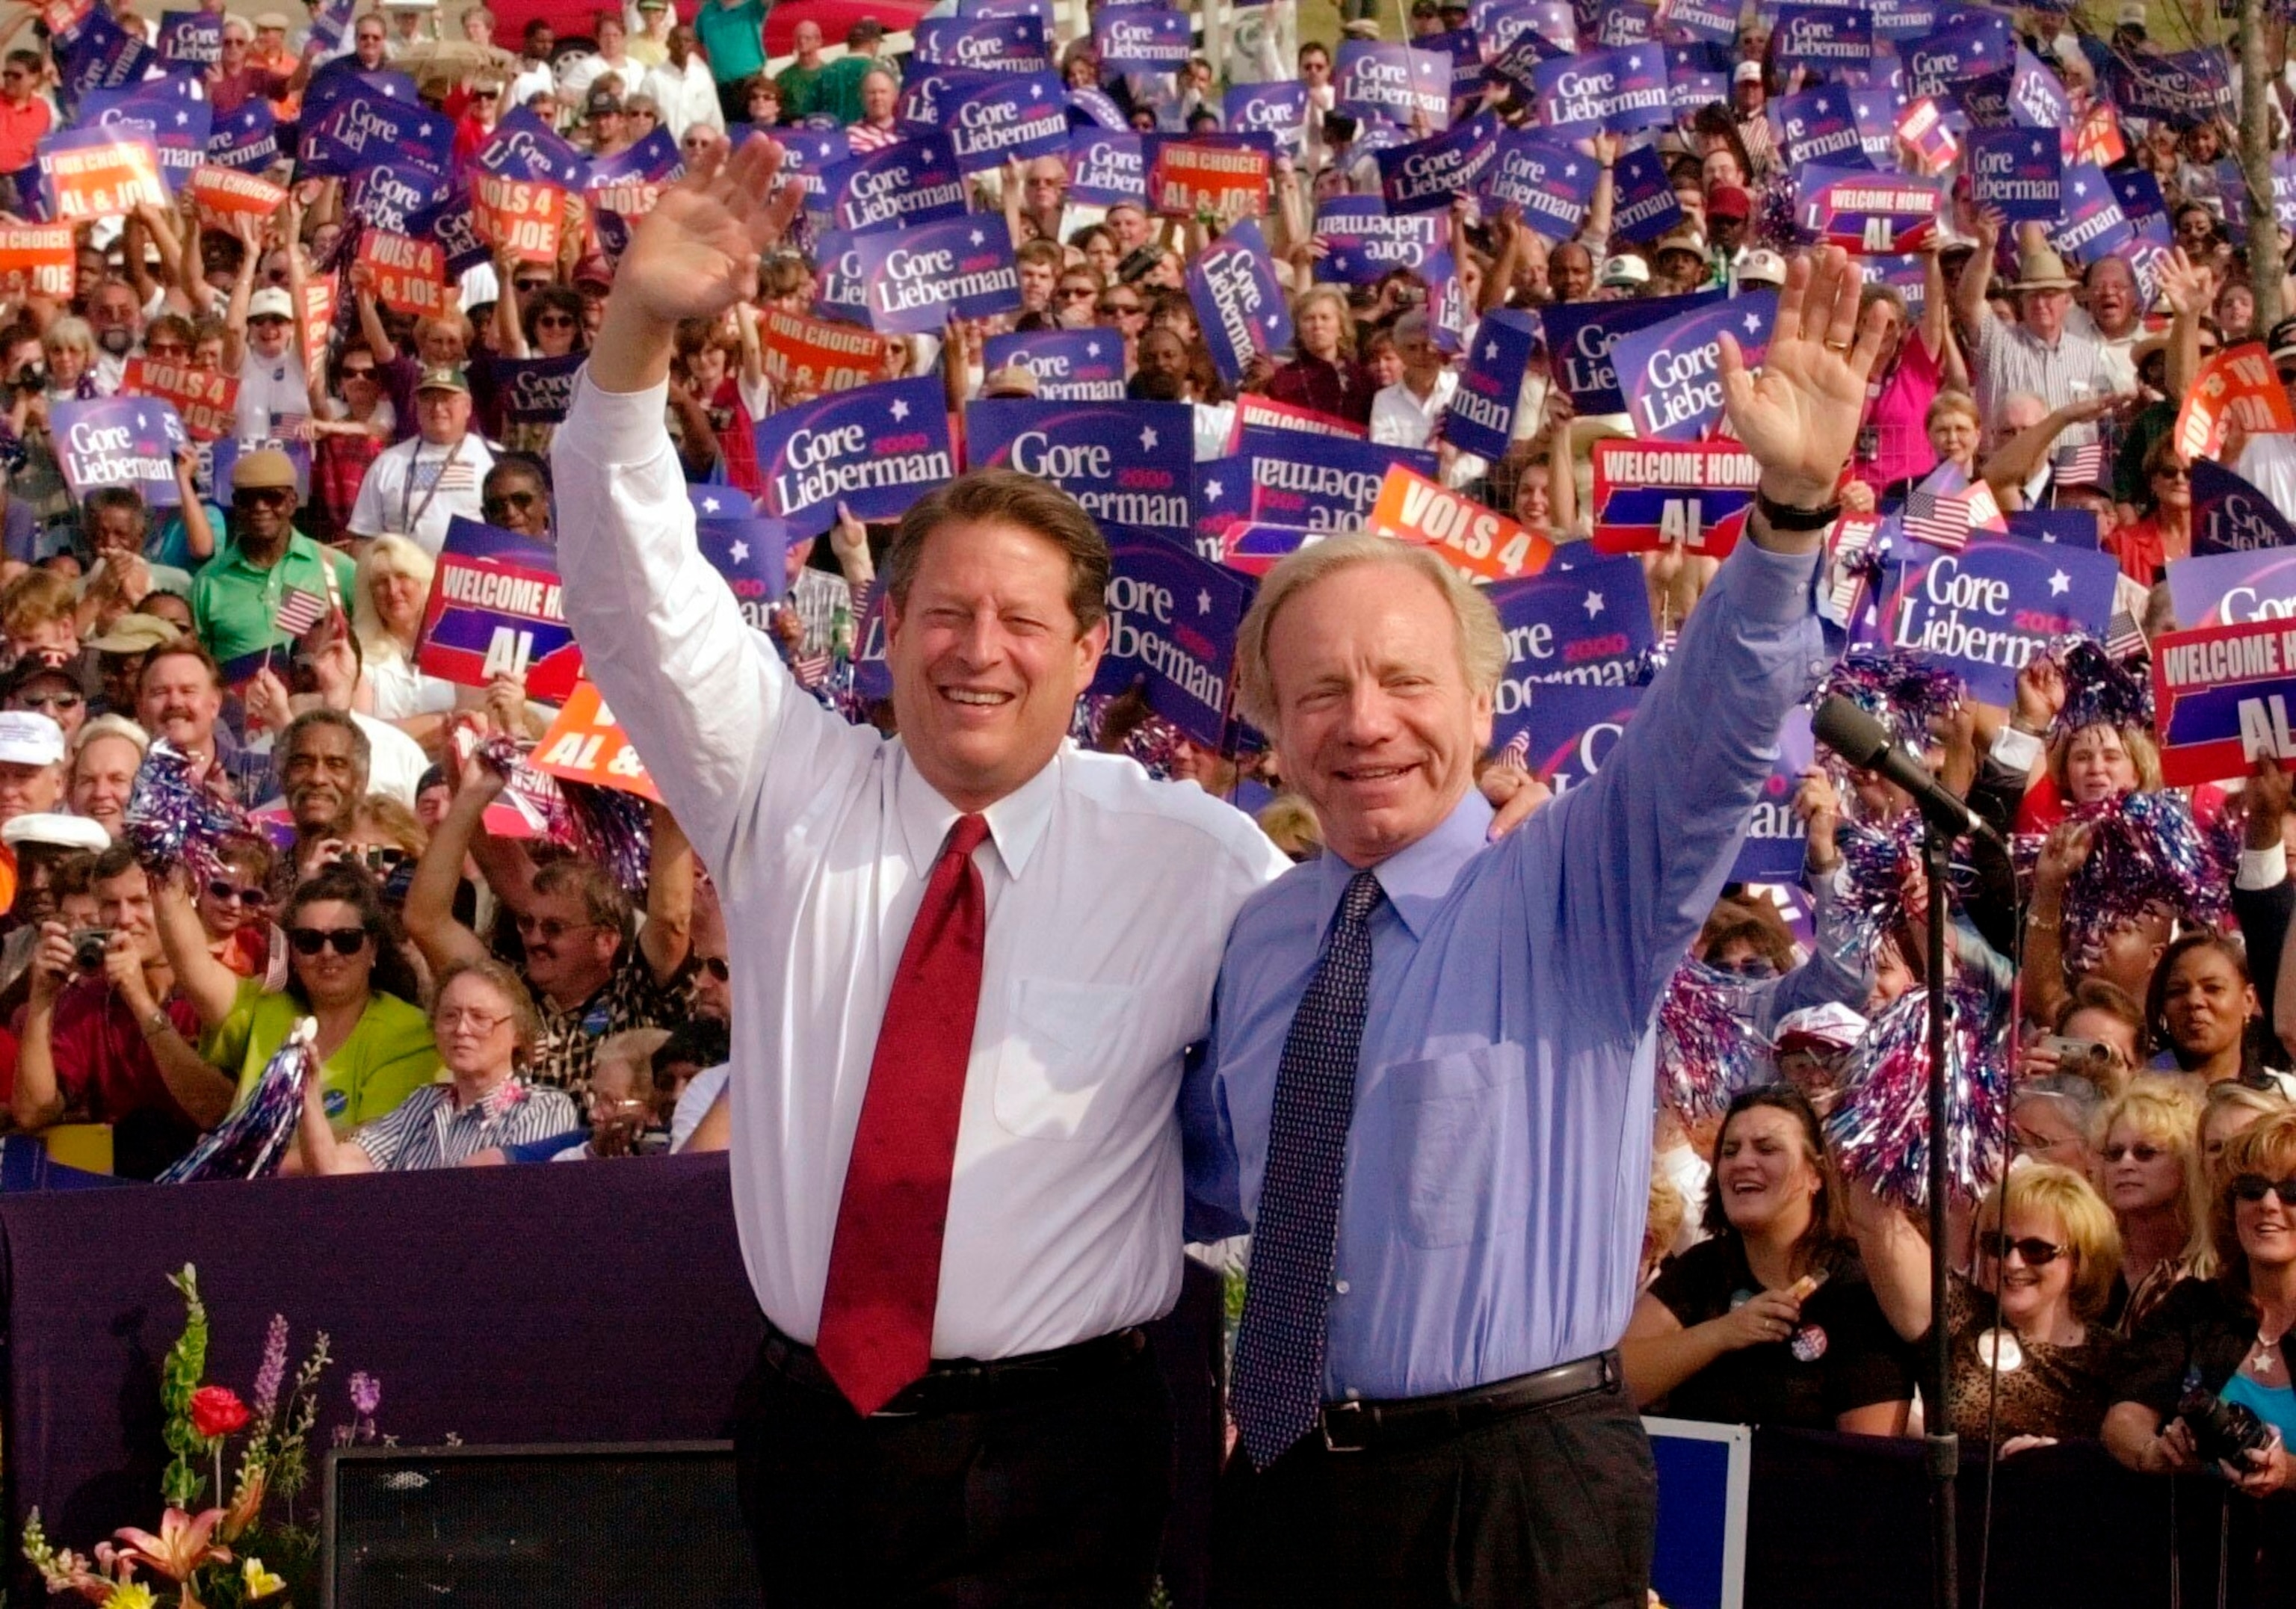 PHOTO: In this Oct. 25, 2000 file photo, Democratic presidential candidate Vice President Al Gore, left, and his running mate, vice presidential candidate Sen. Joe Lieberman wave to supporters at a campaign rally in Jackson, Tenn.